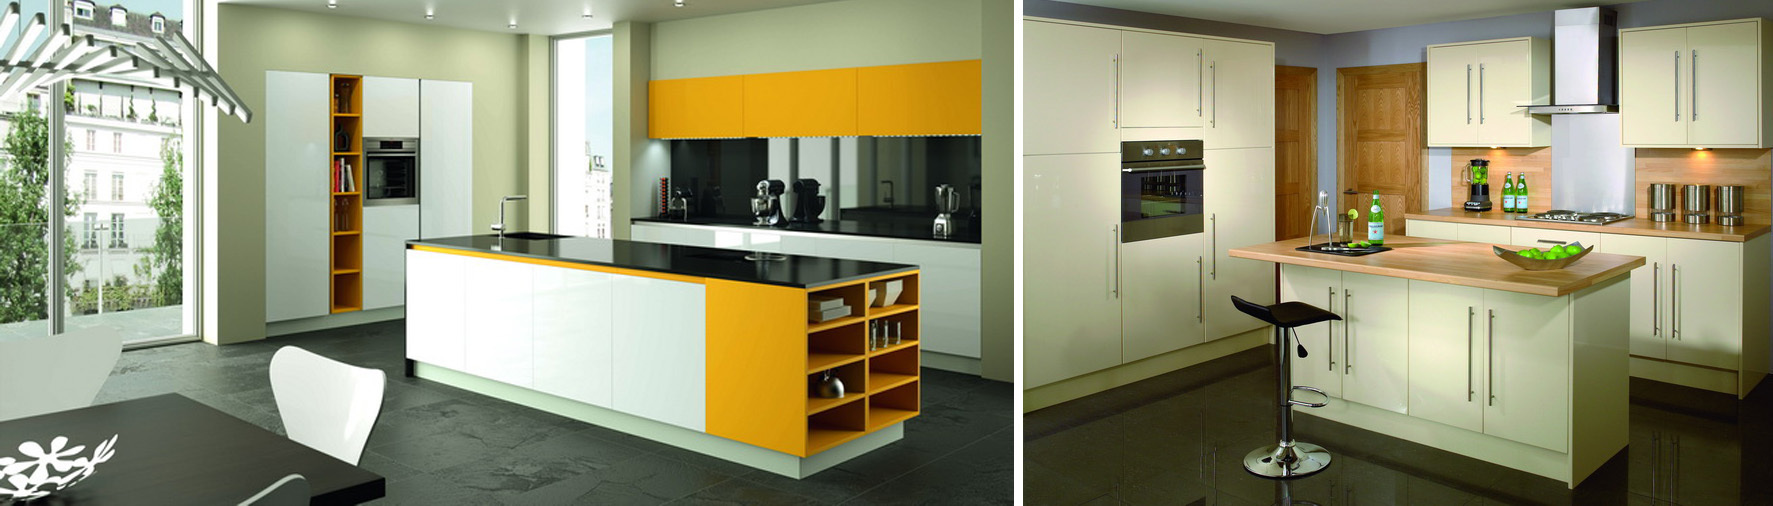 yellow and beige kitchen cabinet